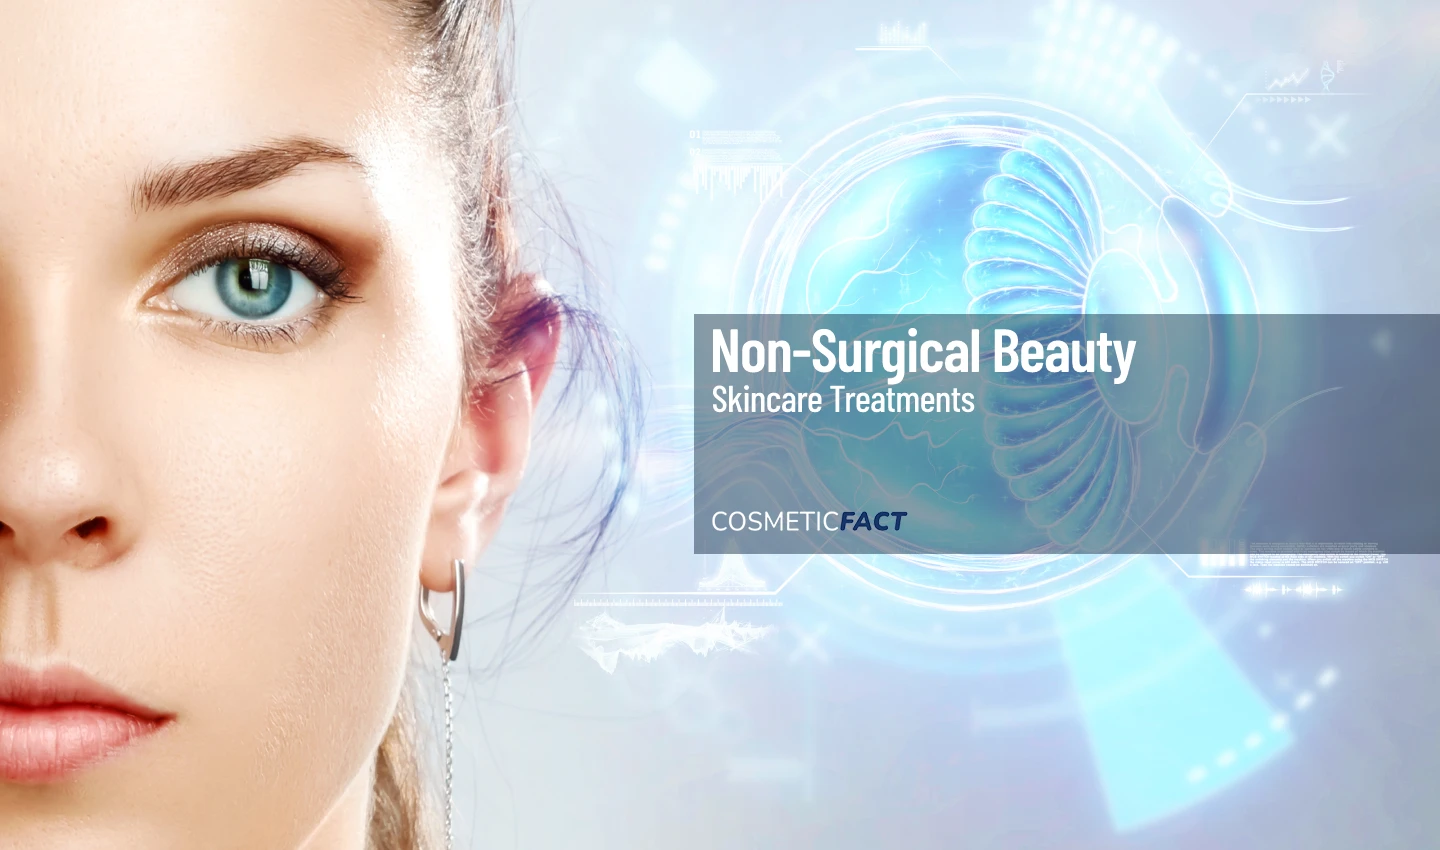 A young woman with clear skin smiling, representing the latest innovative technologies for acne treatment.